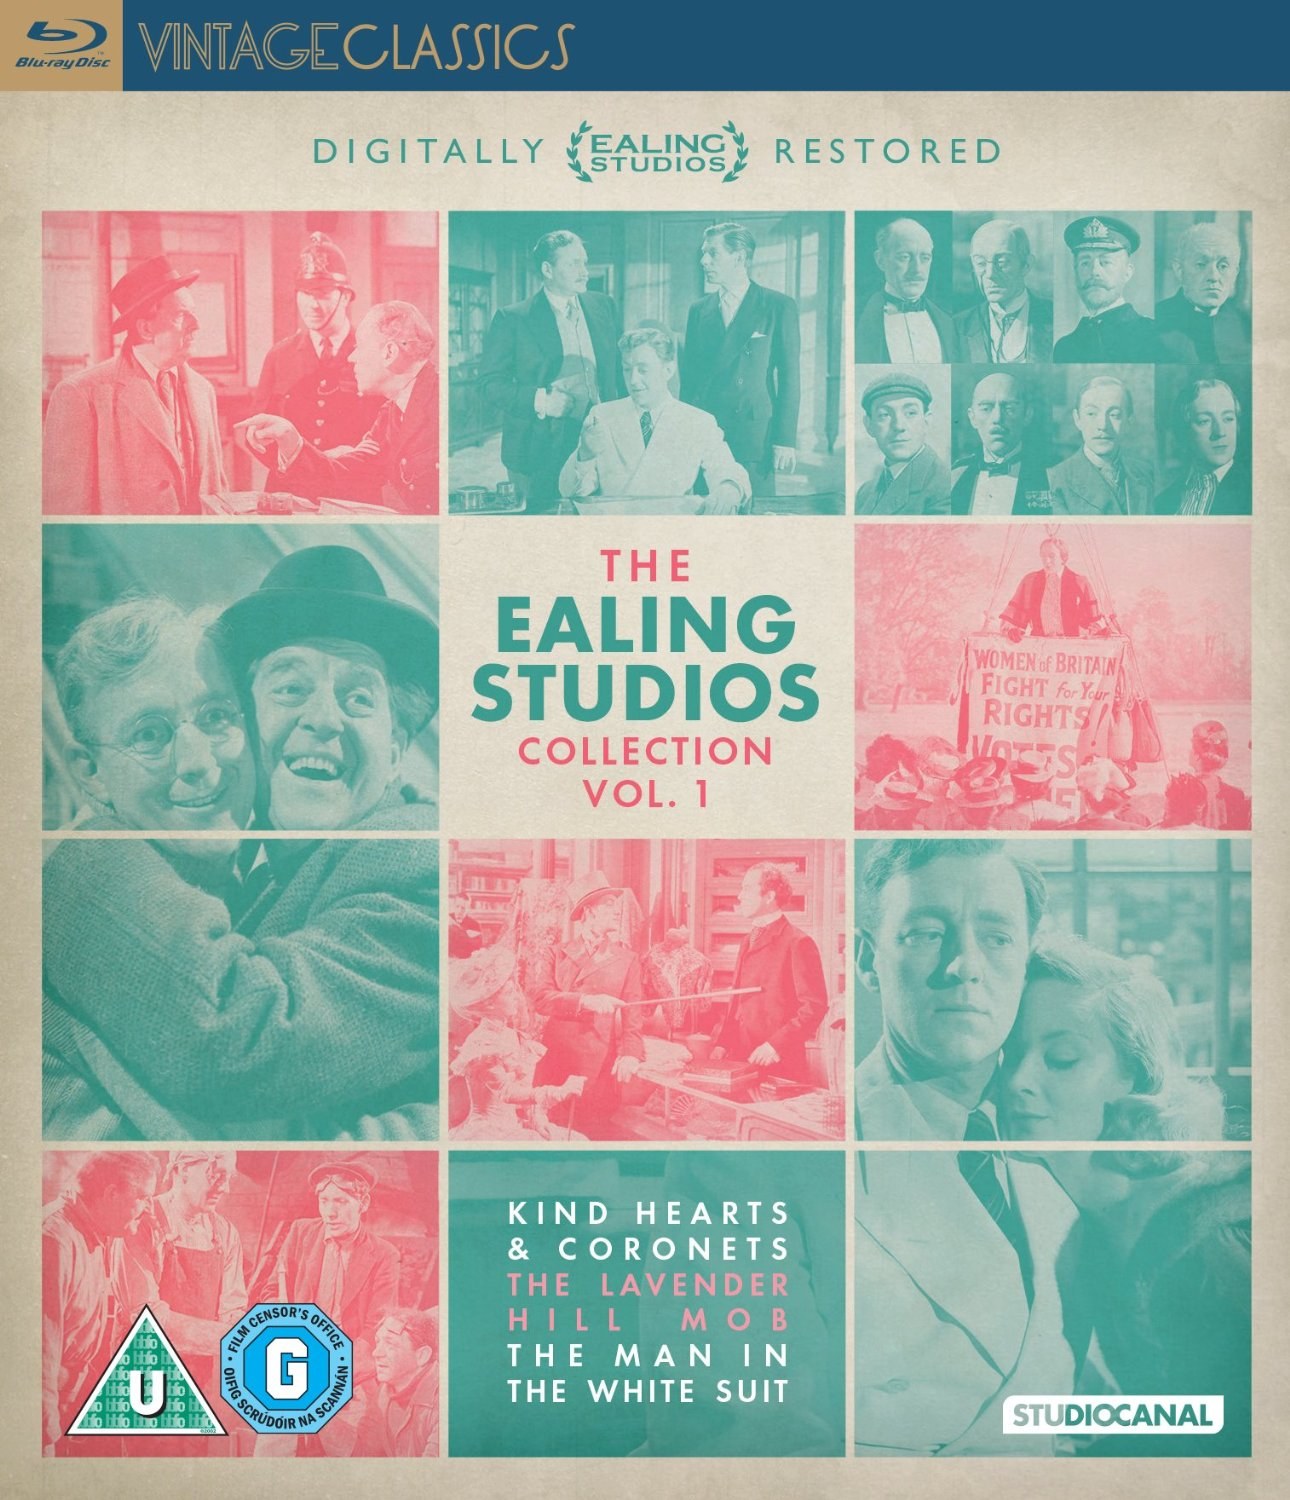 Front cover of The Ealing Studios Collection vol. 1 Blu-ray featuring Alec Guinness, Joan Greenwood and Stanley Holloway.  Part of the Vintage Classics series from Studio Canal.